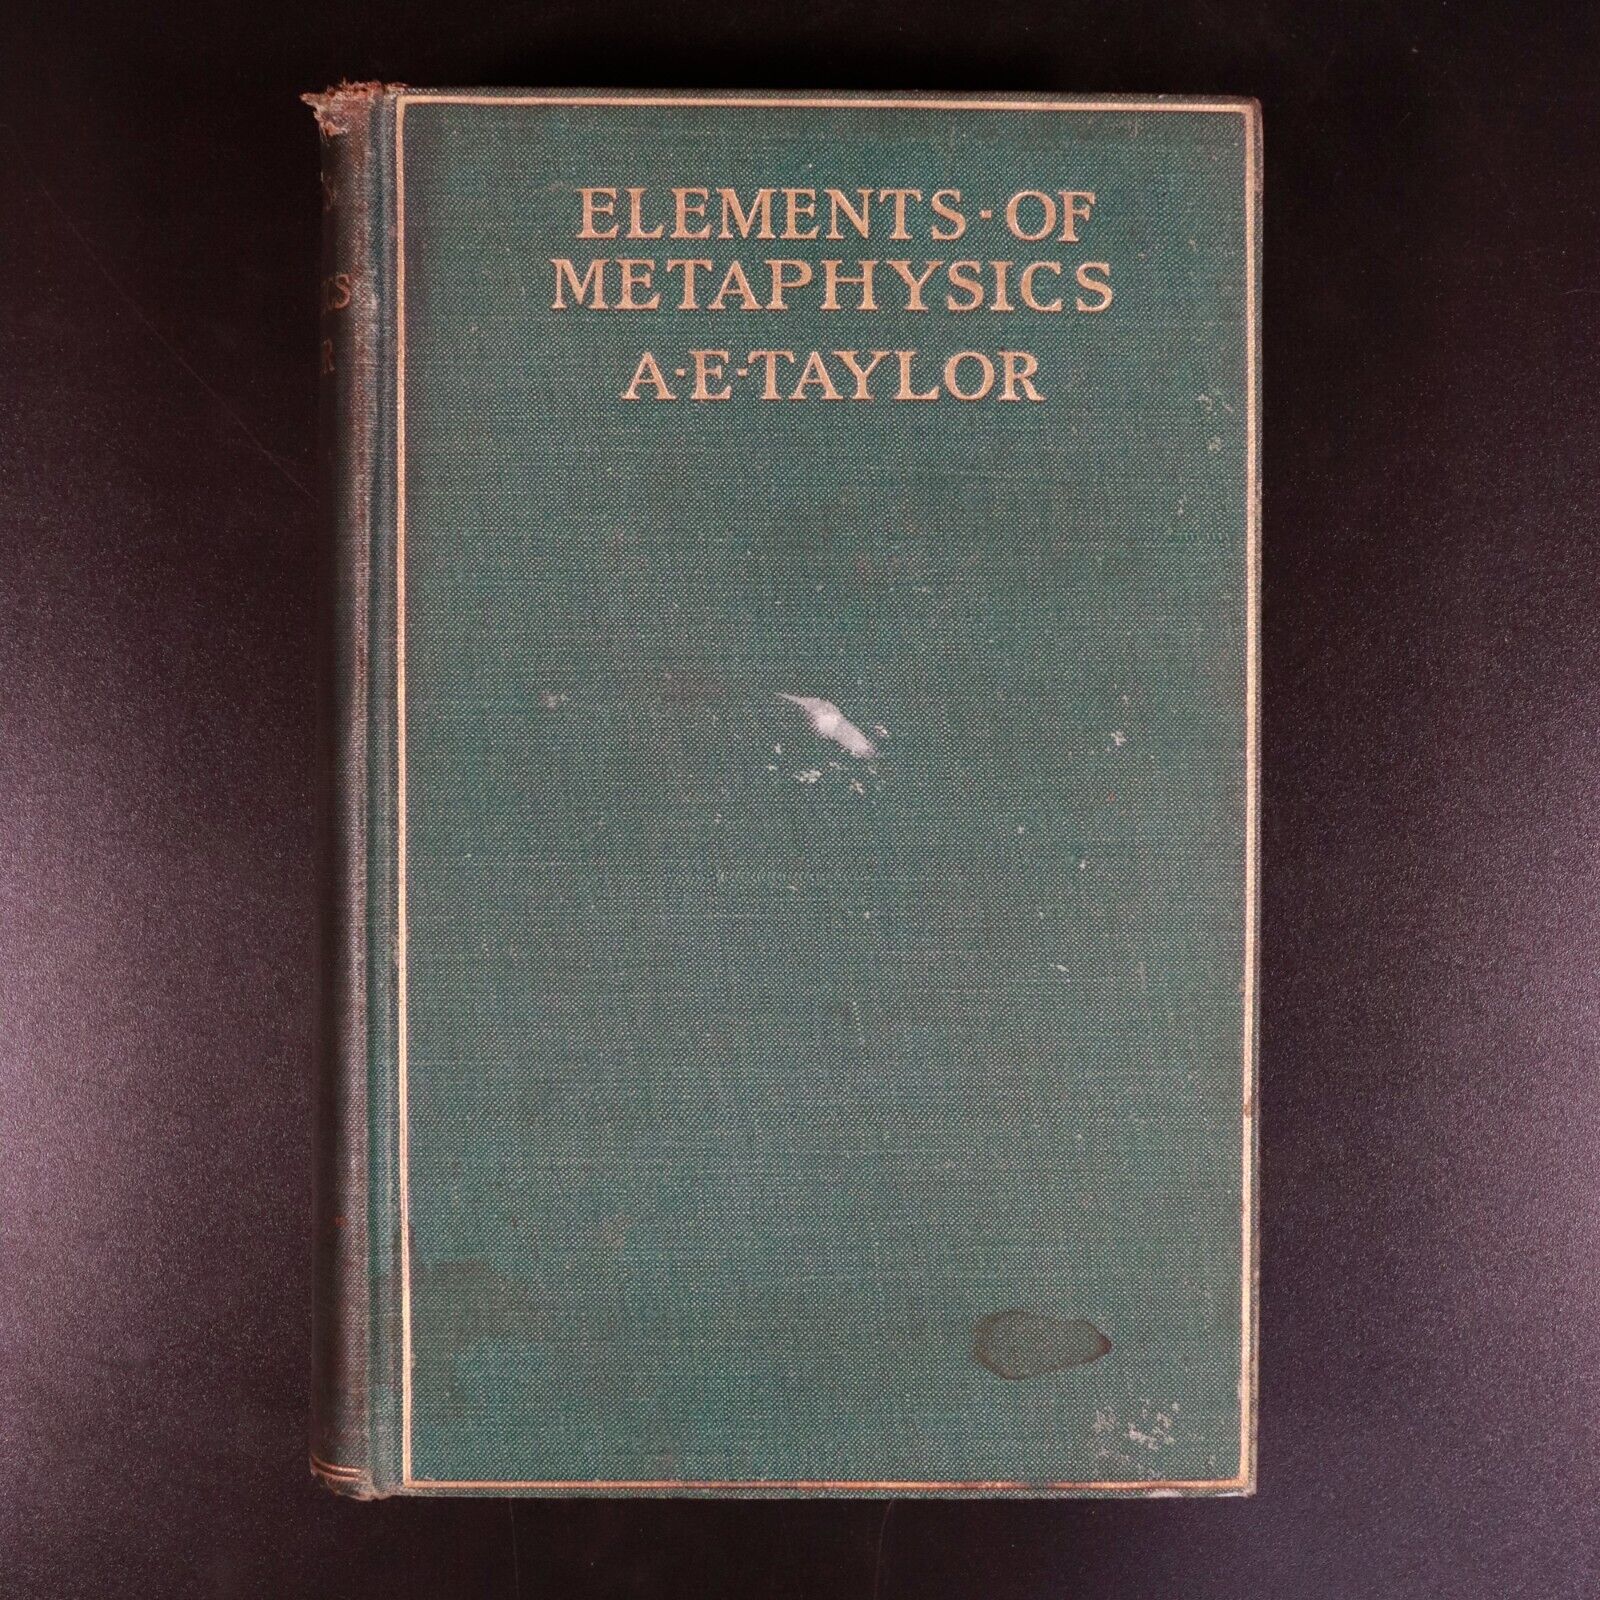 1909 Elements Of Metaphysics by AE Taylor 1st Edition Antique Philosophy Book